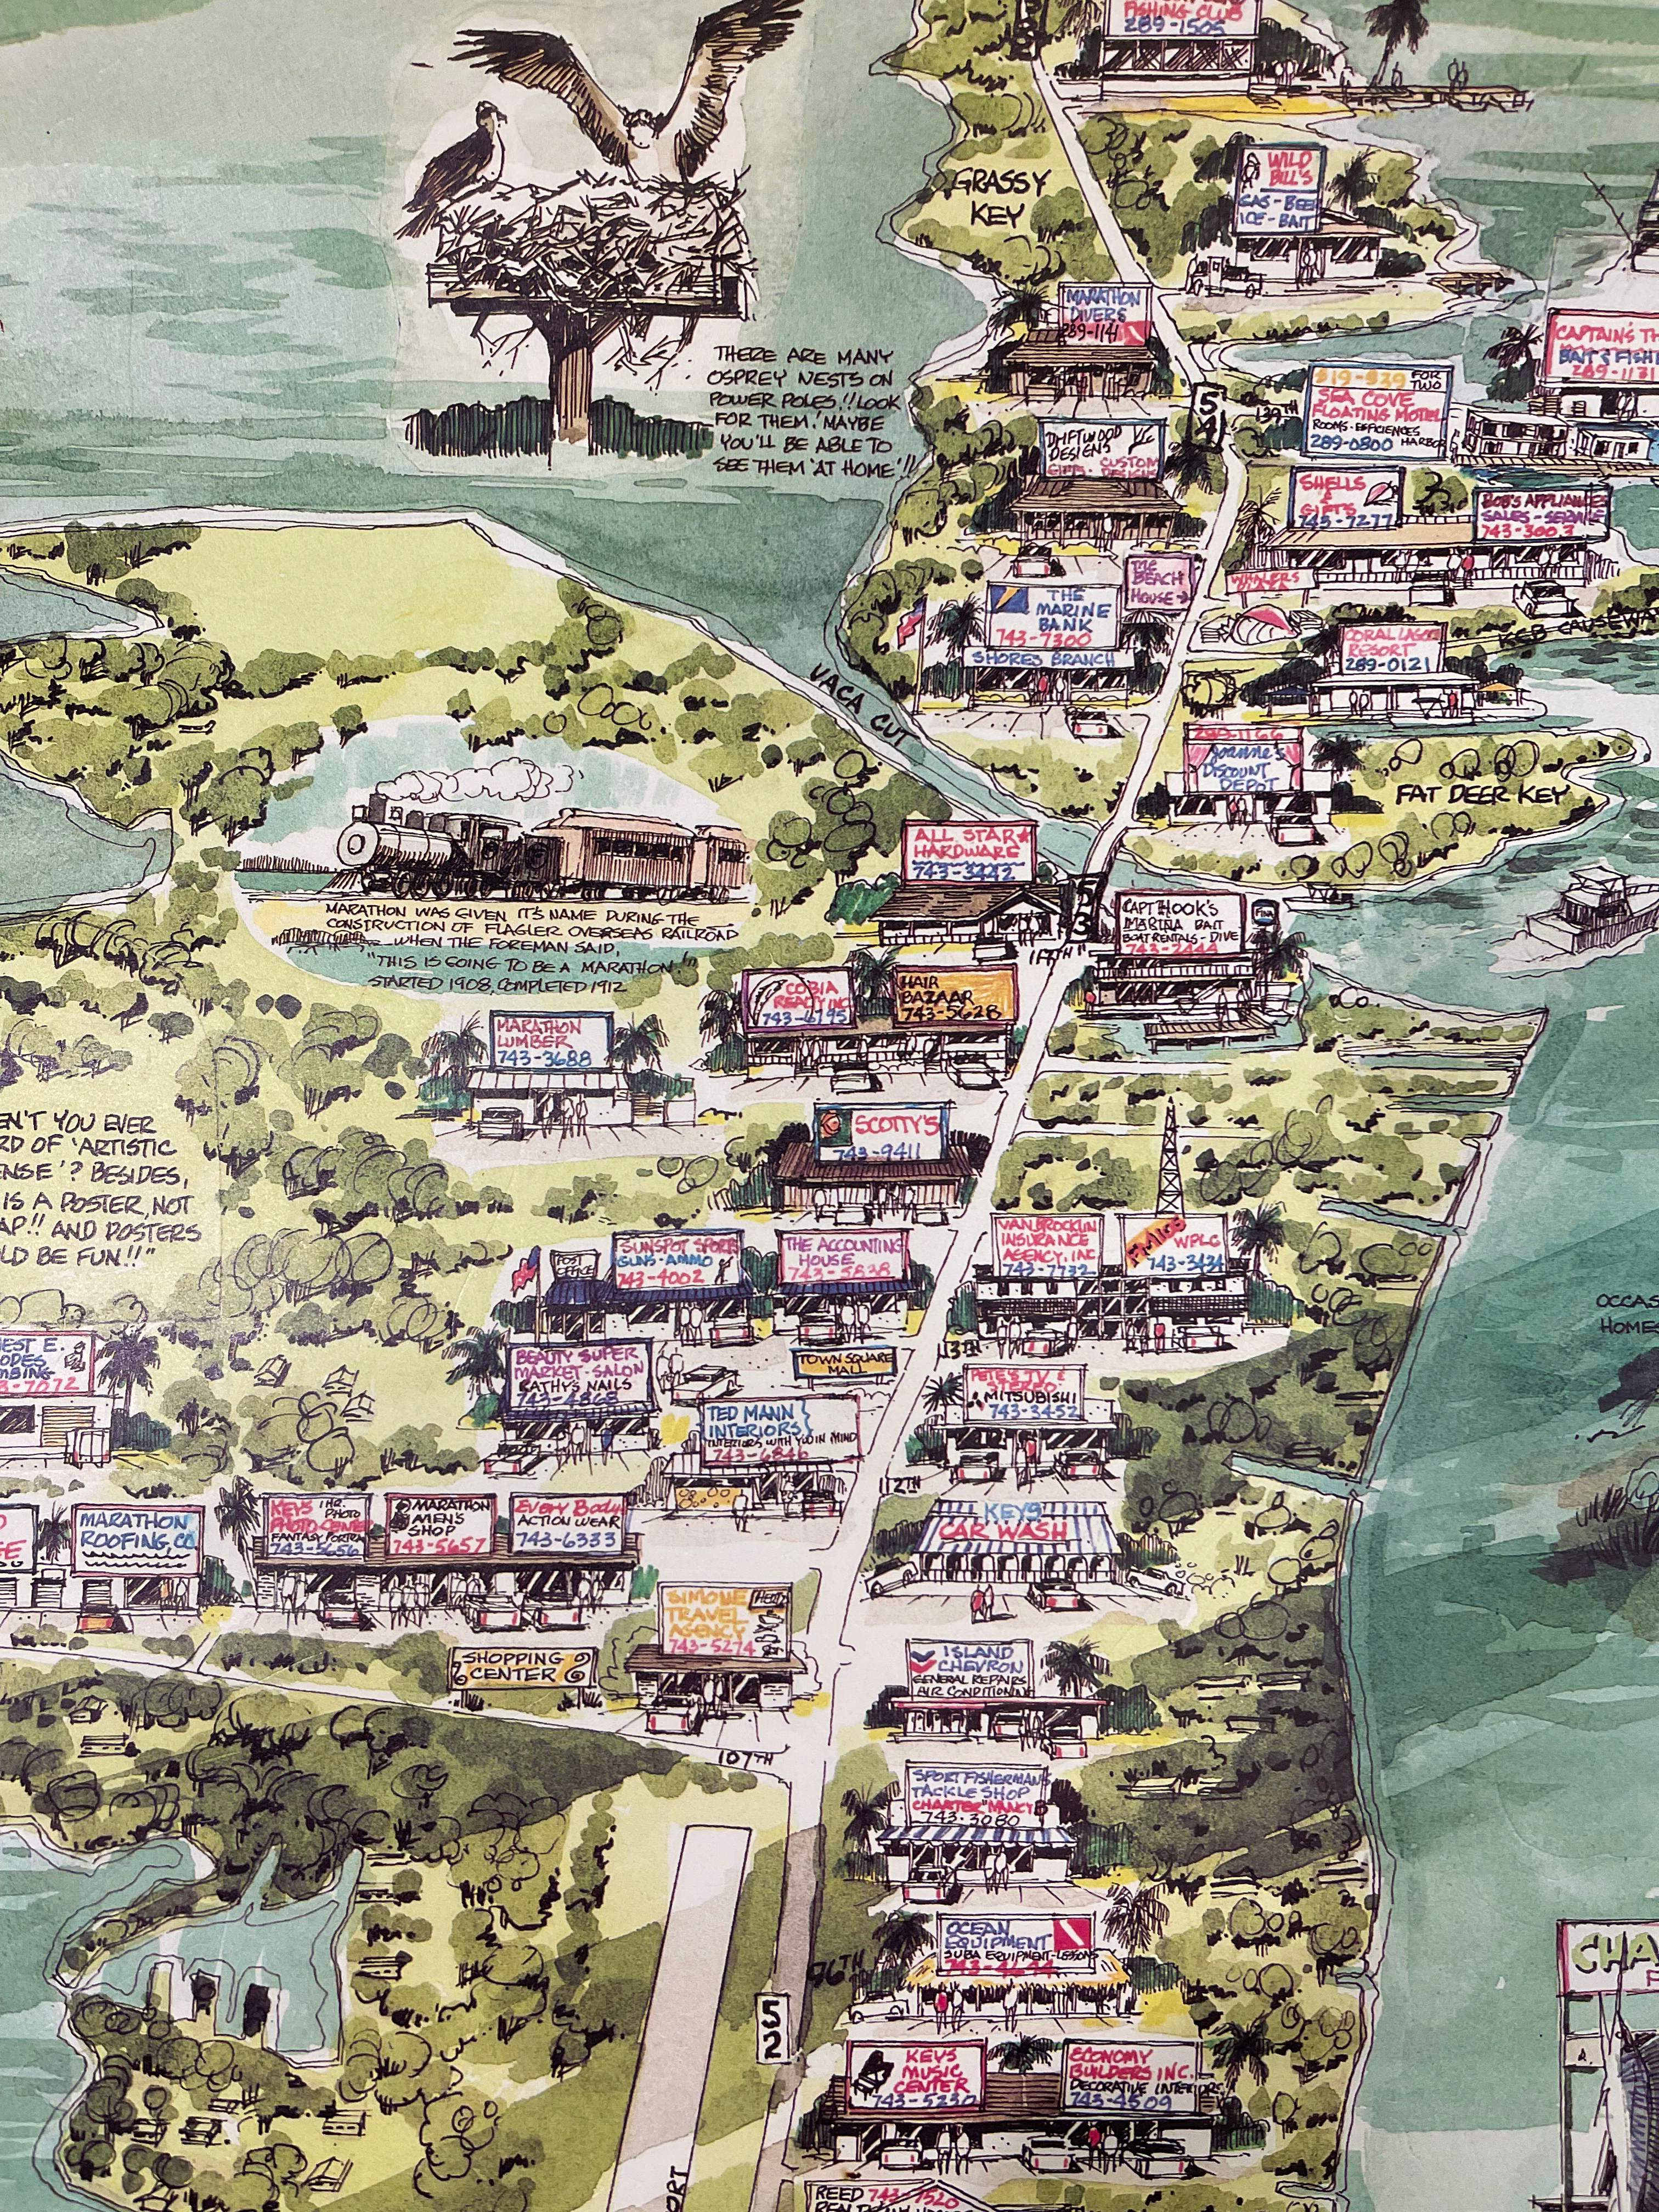 Pictorial advertising poster map of Marathon, Florida by Ron Weaver in 1985